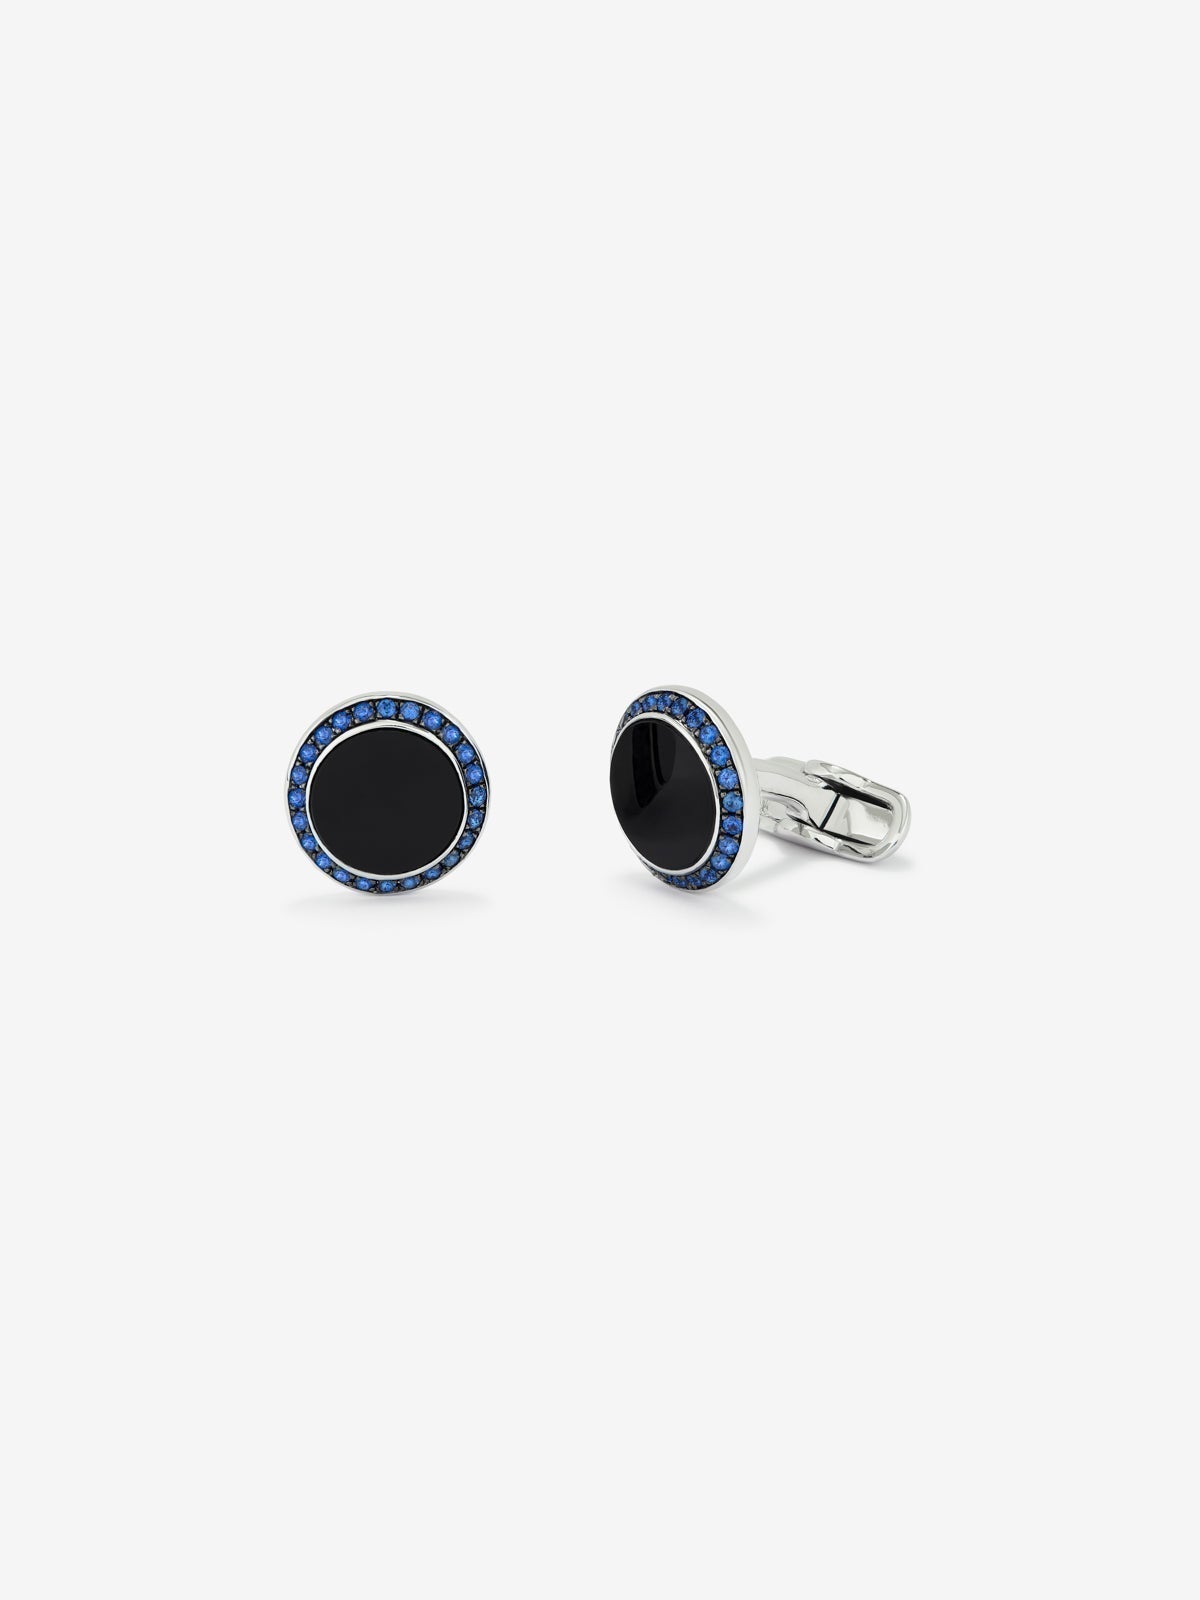 925 silver cufflinks with 2 onyx with a total of 4.24 cts and 48 brilliant-cut blue sapphires with a total of 0.68 cts